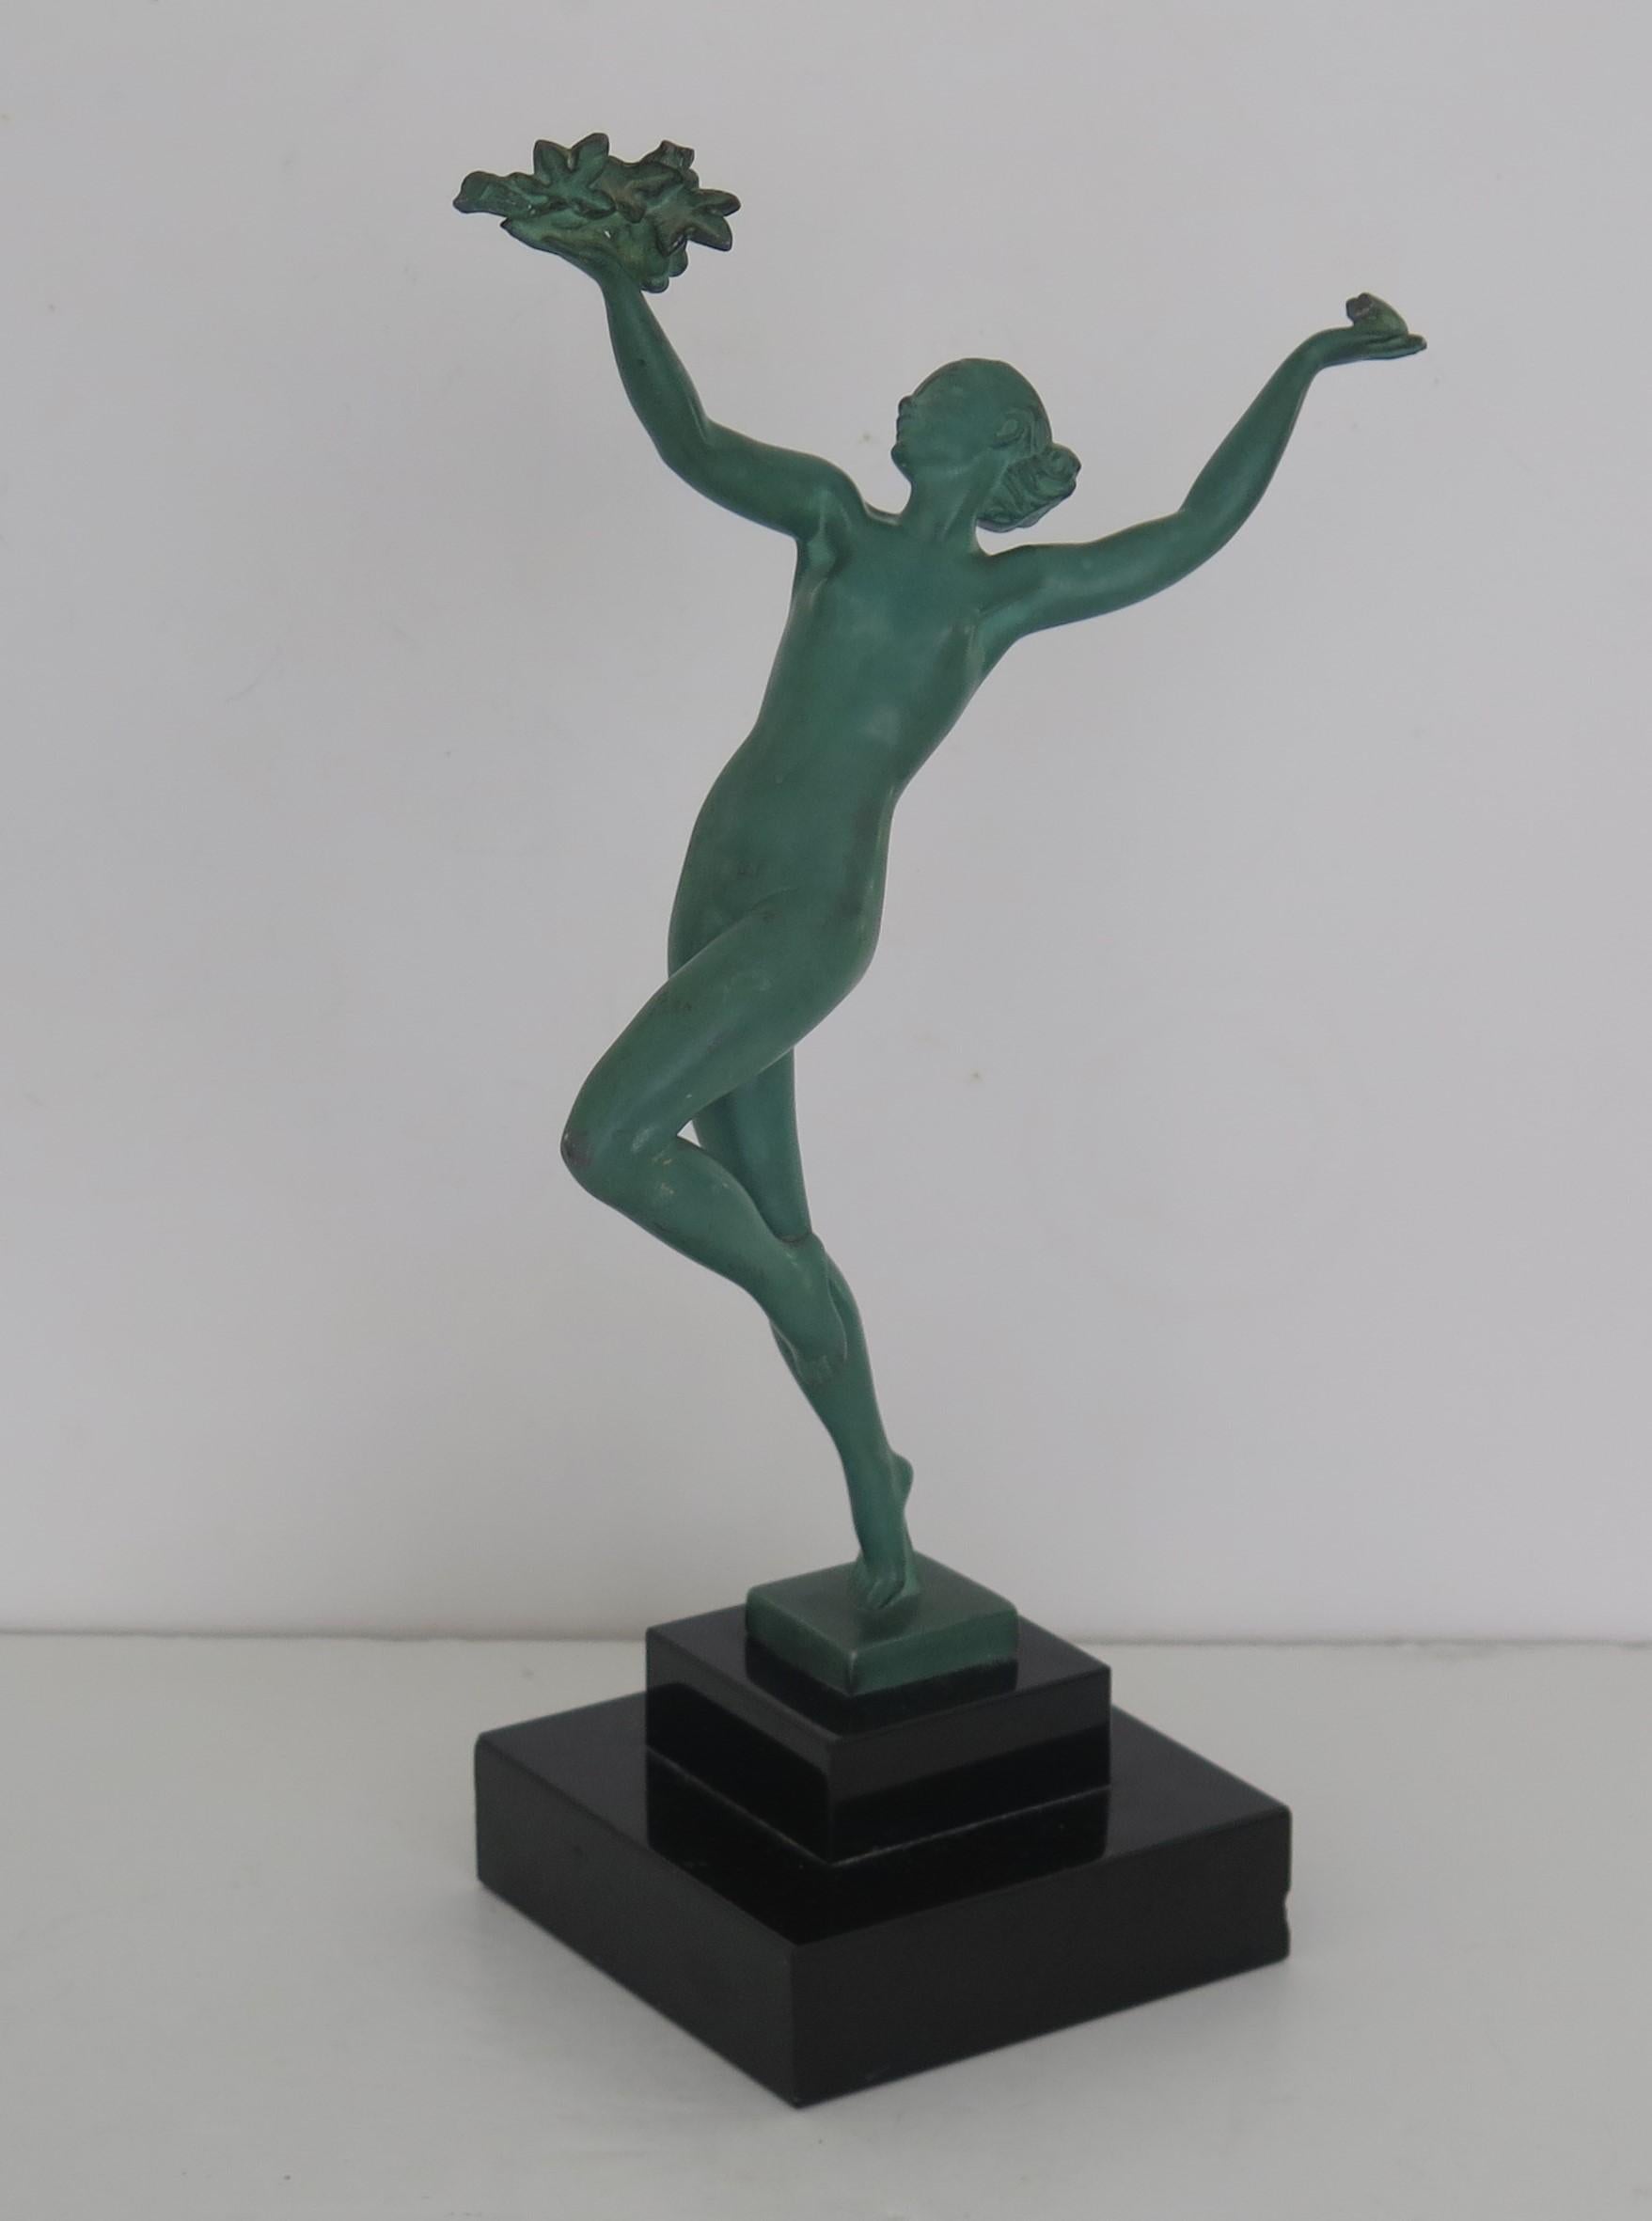 This is an original metal figurine of a Dancer by Max Le Verrier / Pierre Le Faguays, called GRISERIE, and signed GUERBE, made in France in the Art Deco period, circa 1930 .

The figurine is beautifully sculpted by Pierre le Faguays in